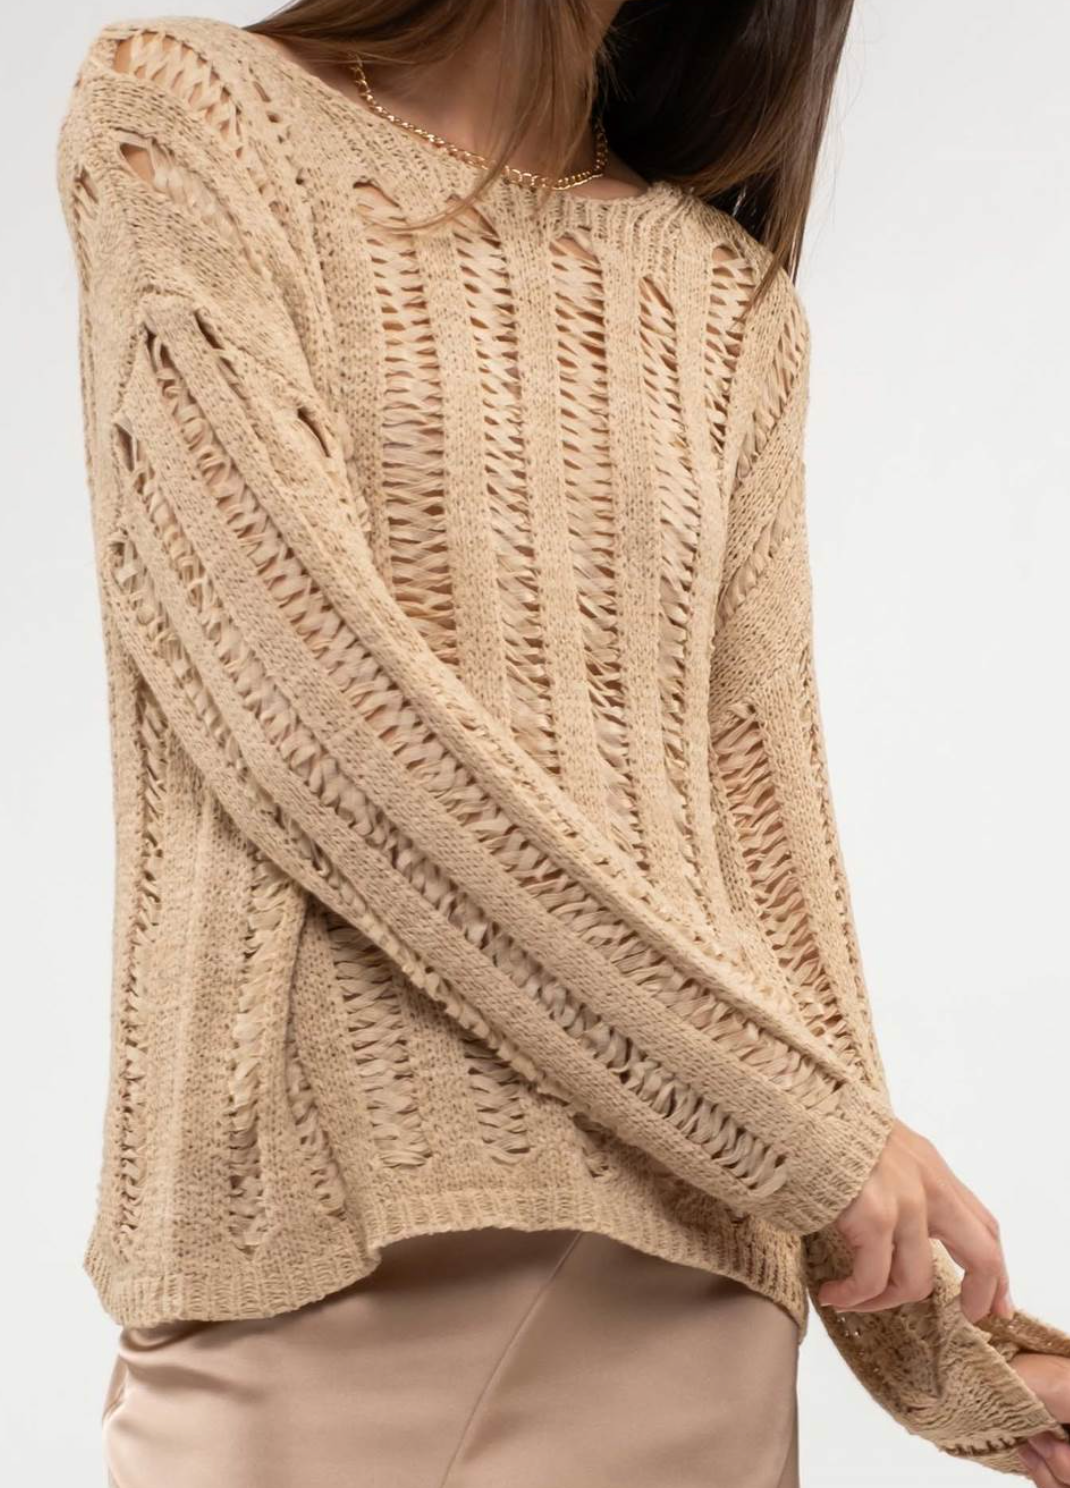 Crochet Knit Pullover in Khaki - The Street Boutique 